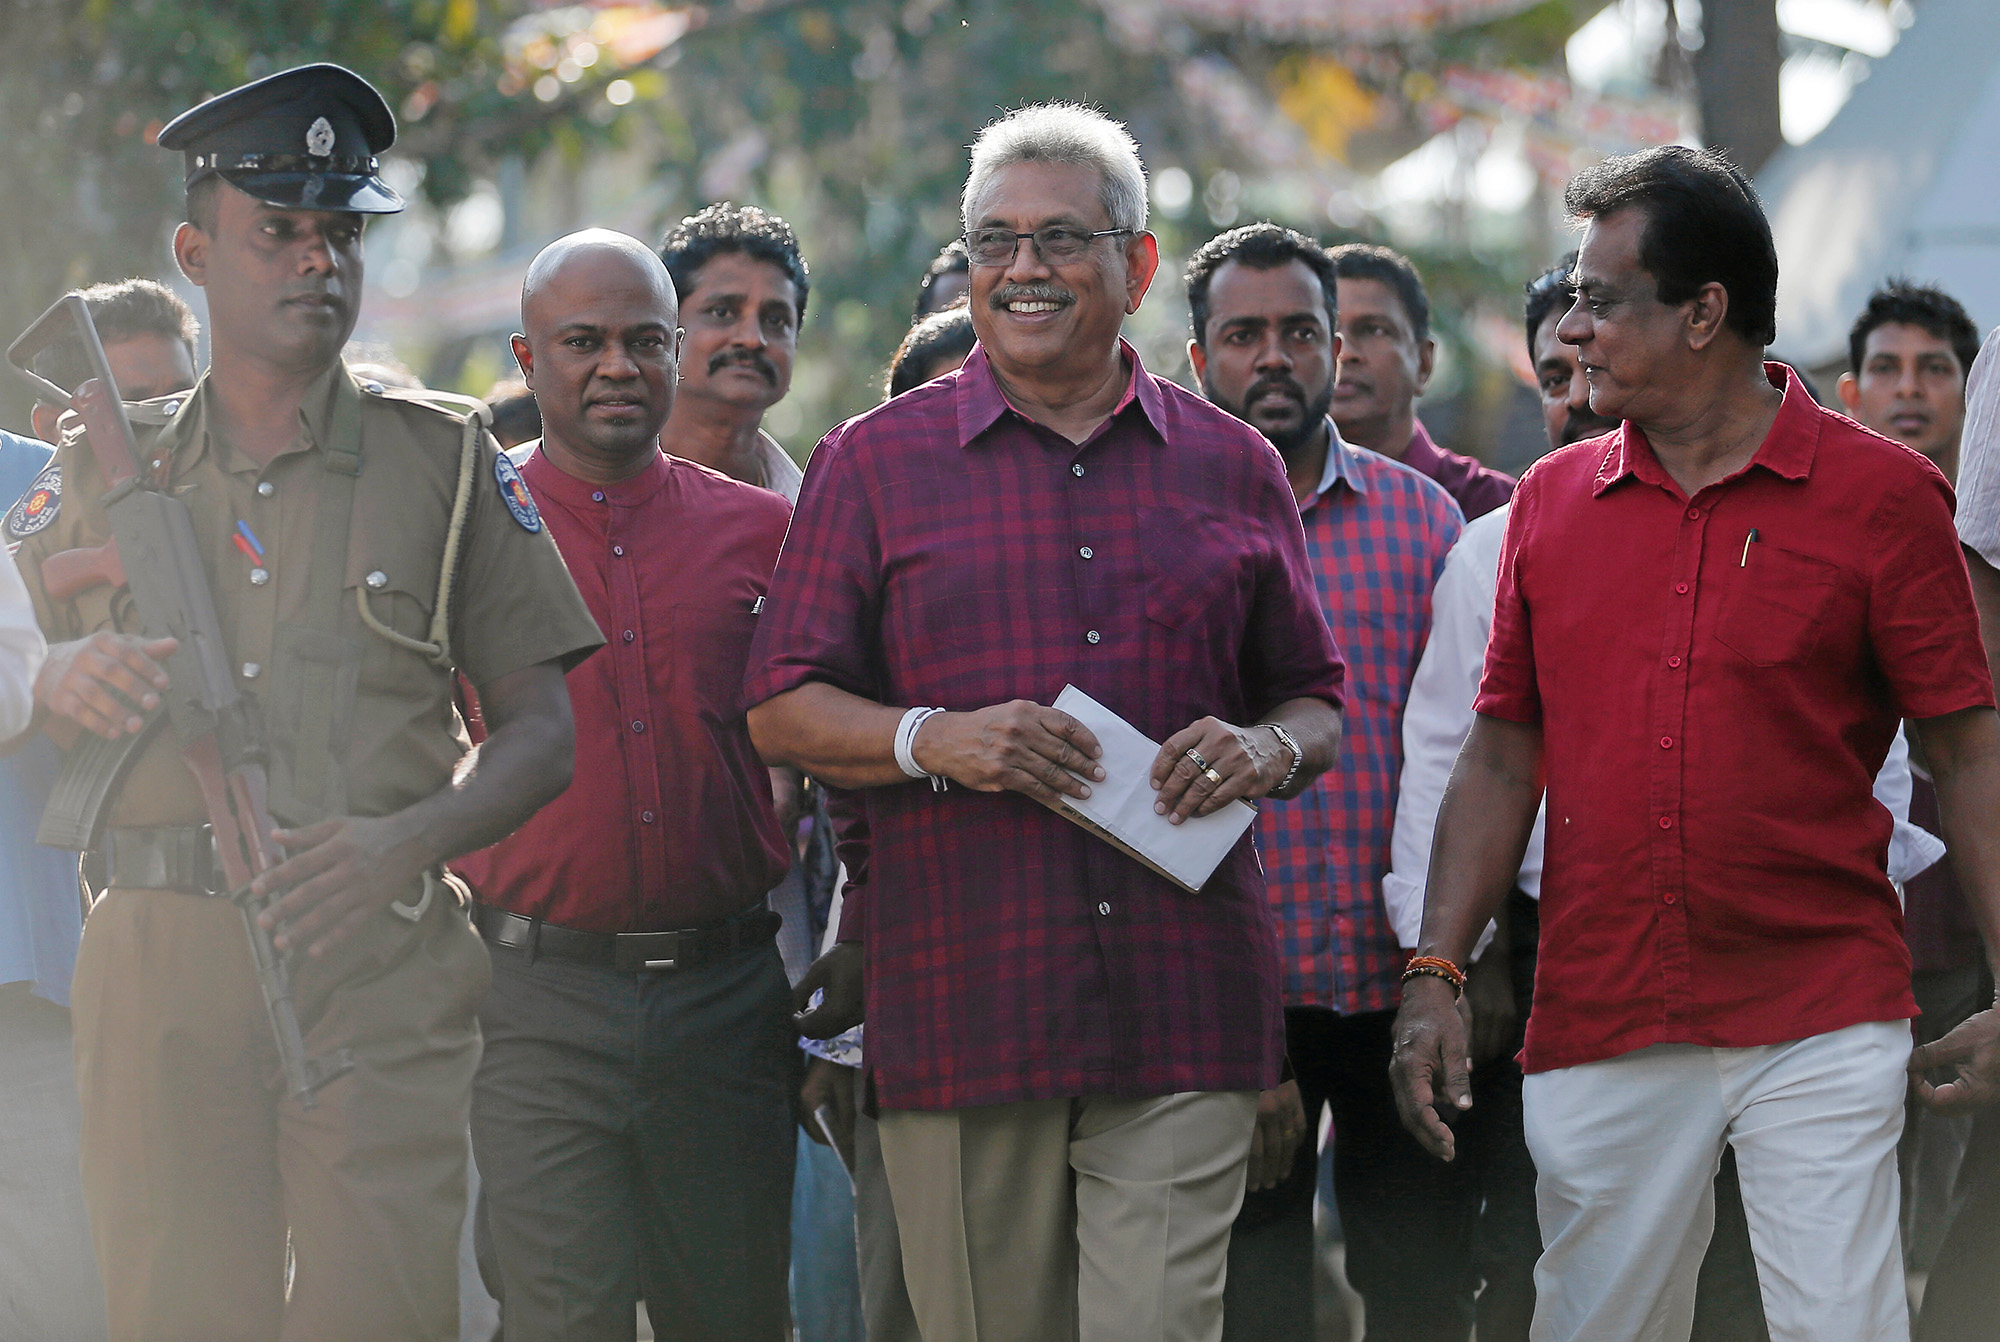 Sri Lanka People's Front party presidential election candidate and former wartime defence chief Gotabaya Rajapaksa leaves after casting his vote during the presidential election in Colombo, Sri Lanka, on Novermber 16, 2019.